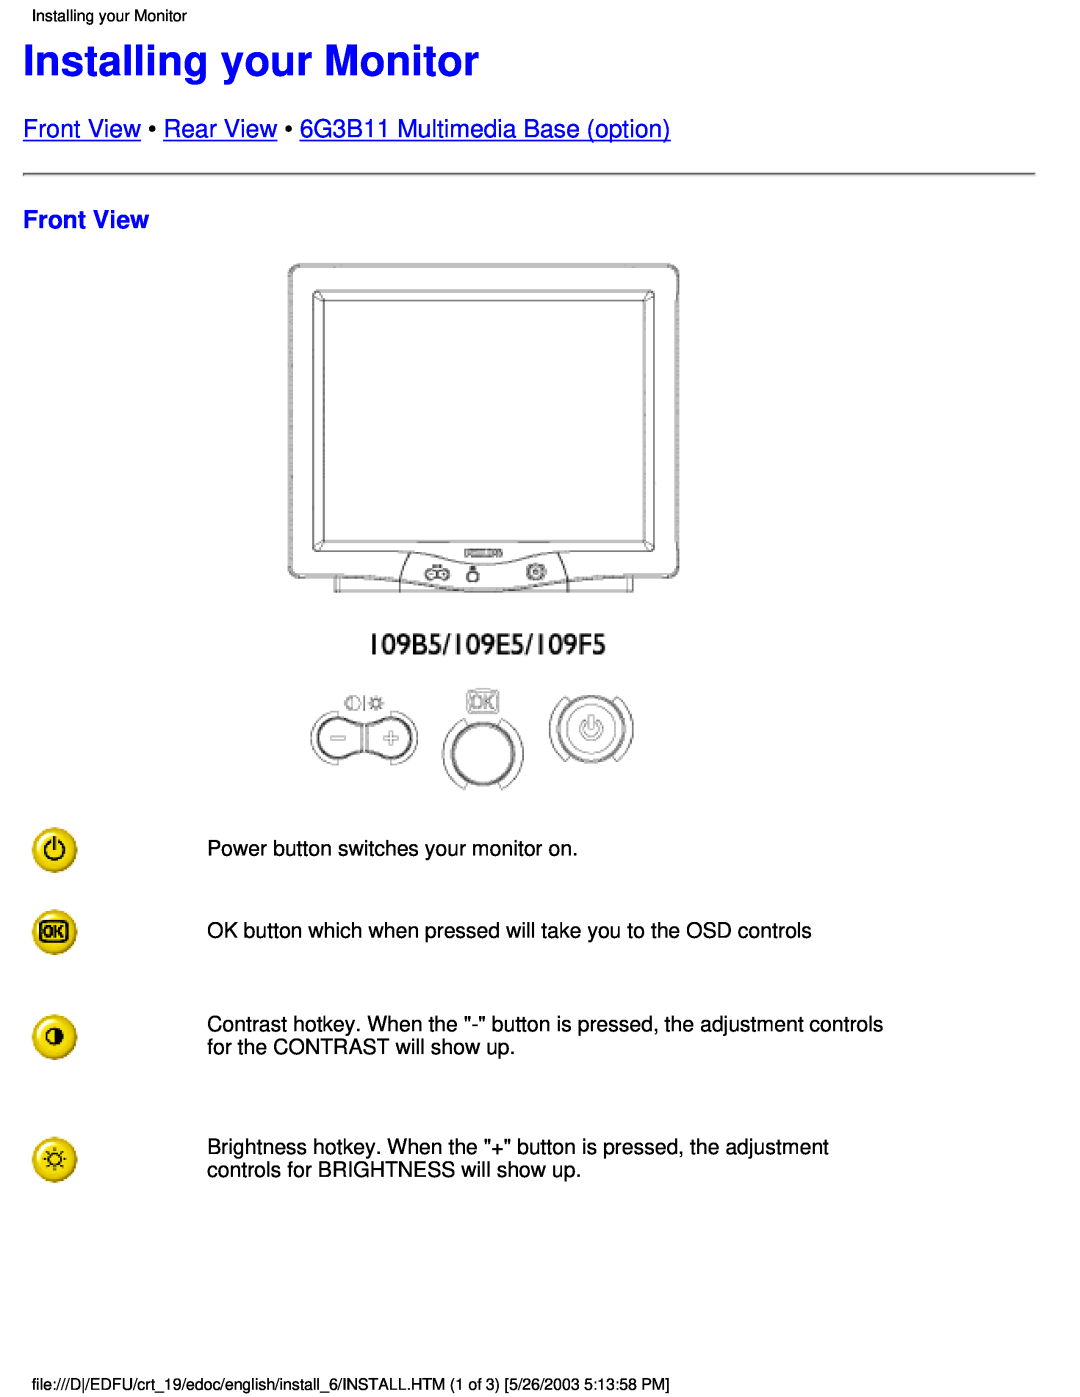 Philips 109E5 user manual Installing your Monitor, Front View Rear View 6G3B11 Multimedia Base option 